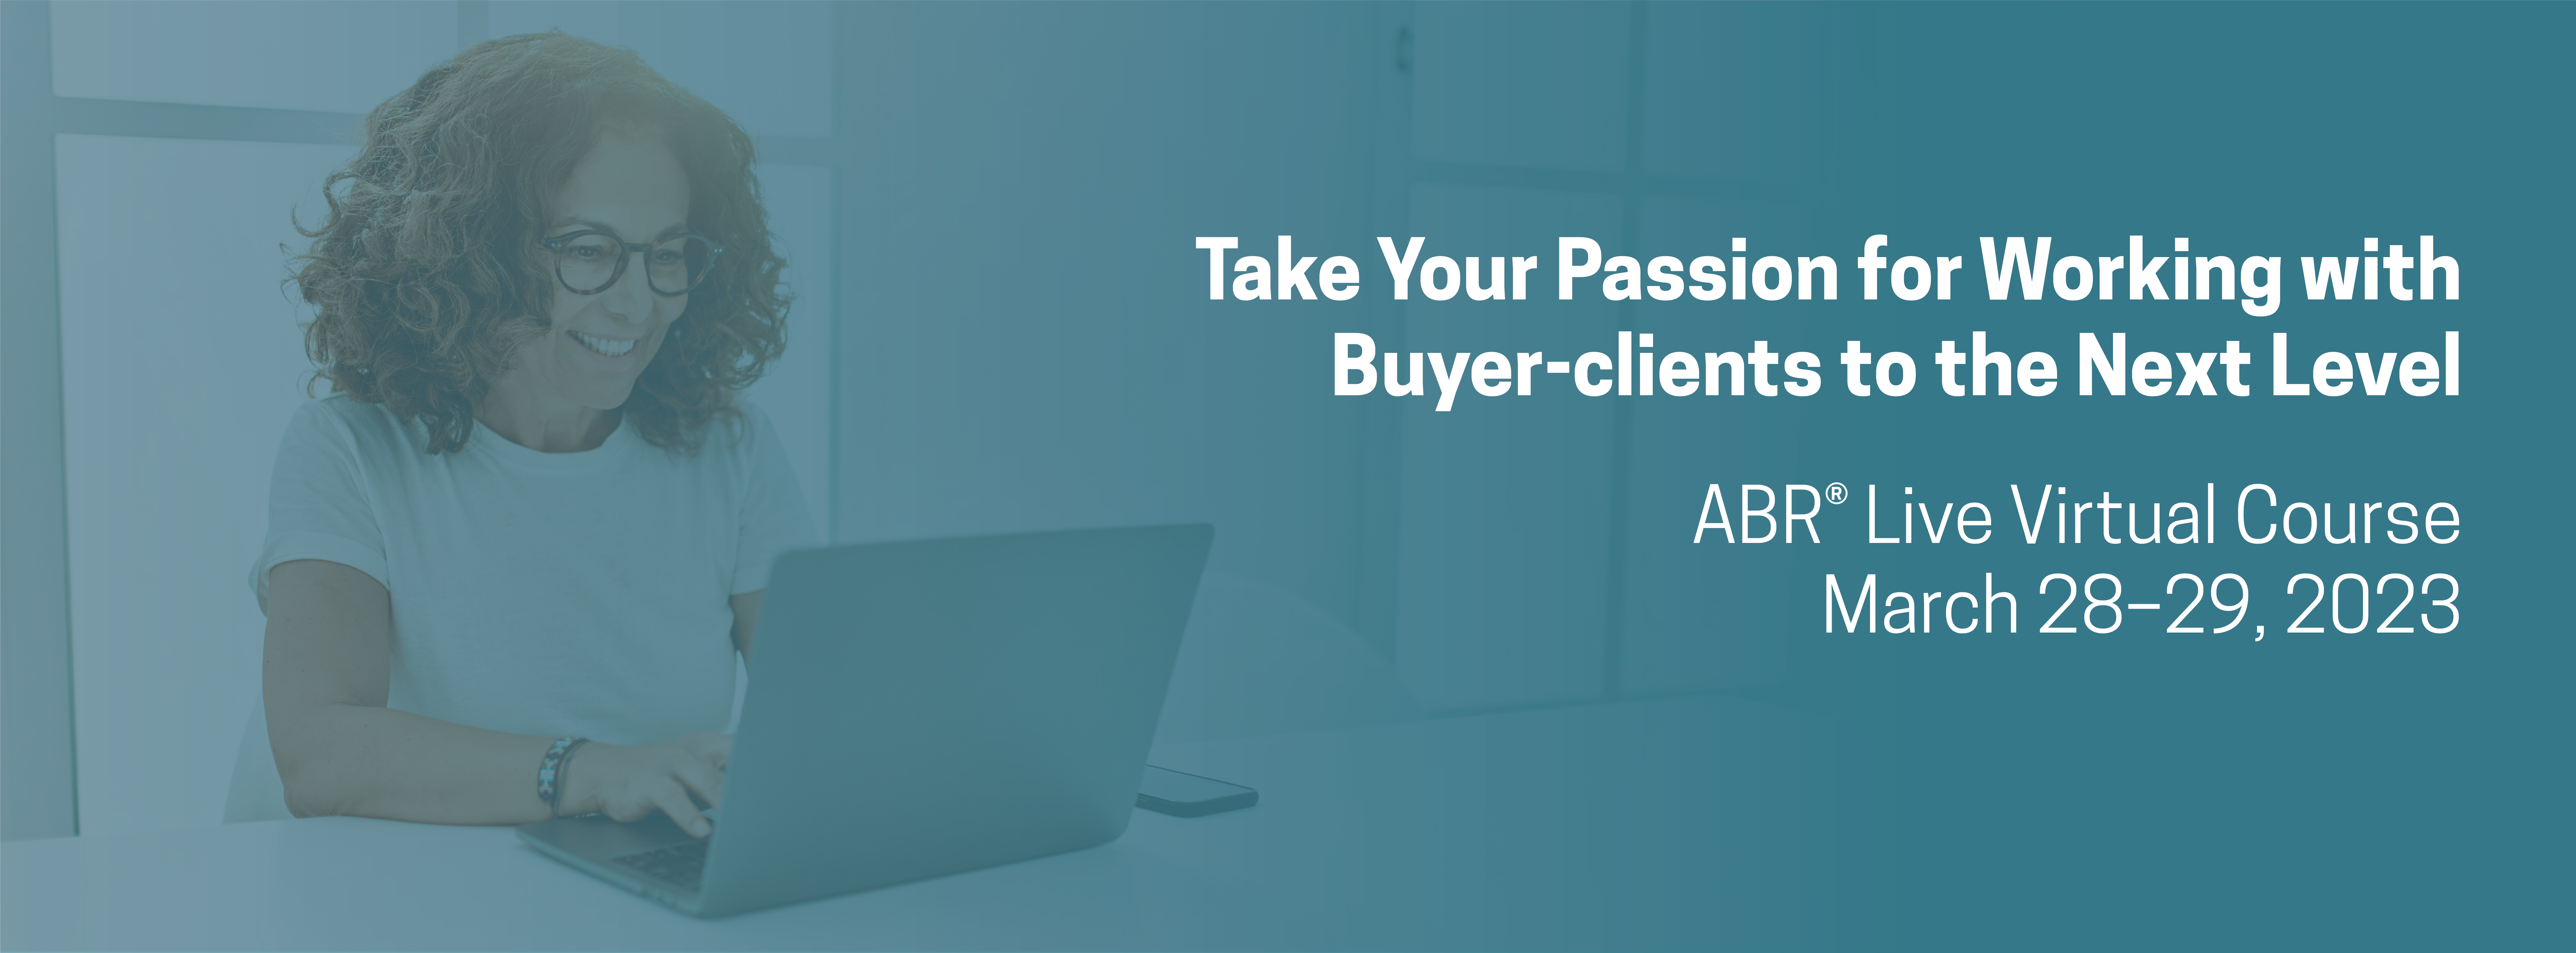 Take your passion for working with buyer-clients to the next level.